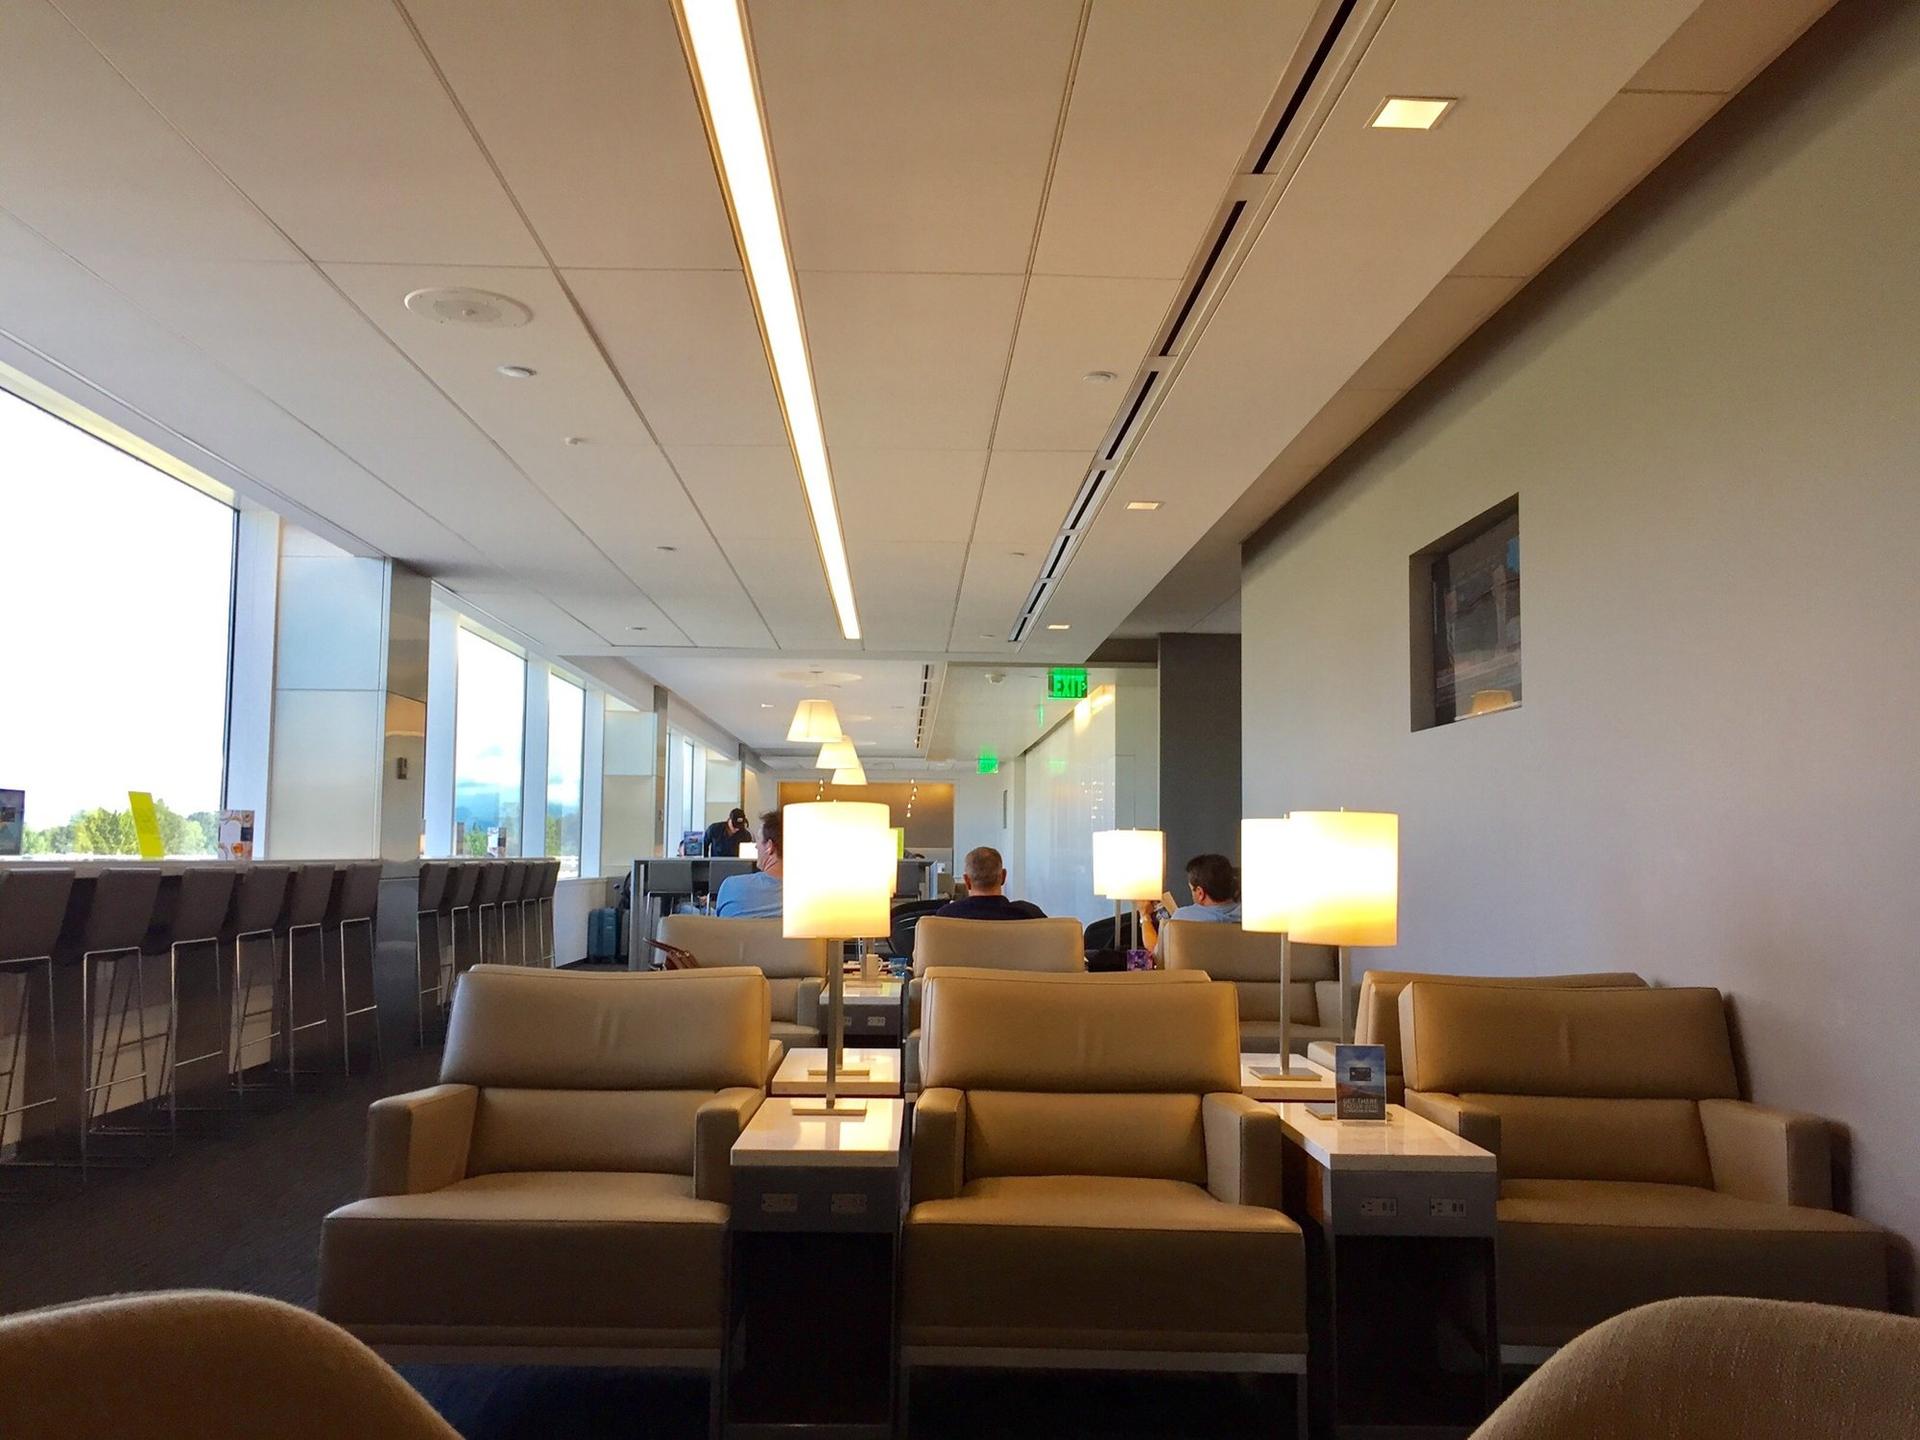 United Airlines United Club image 19 of 57